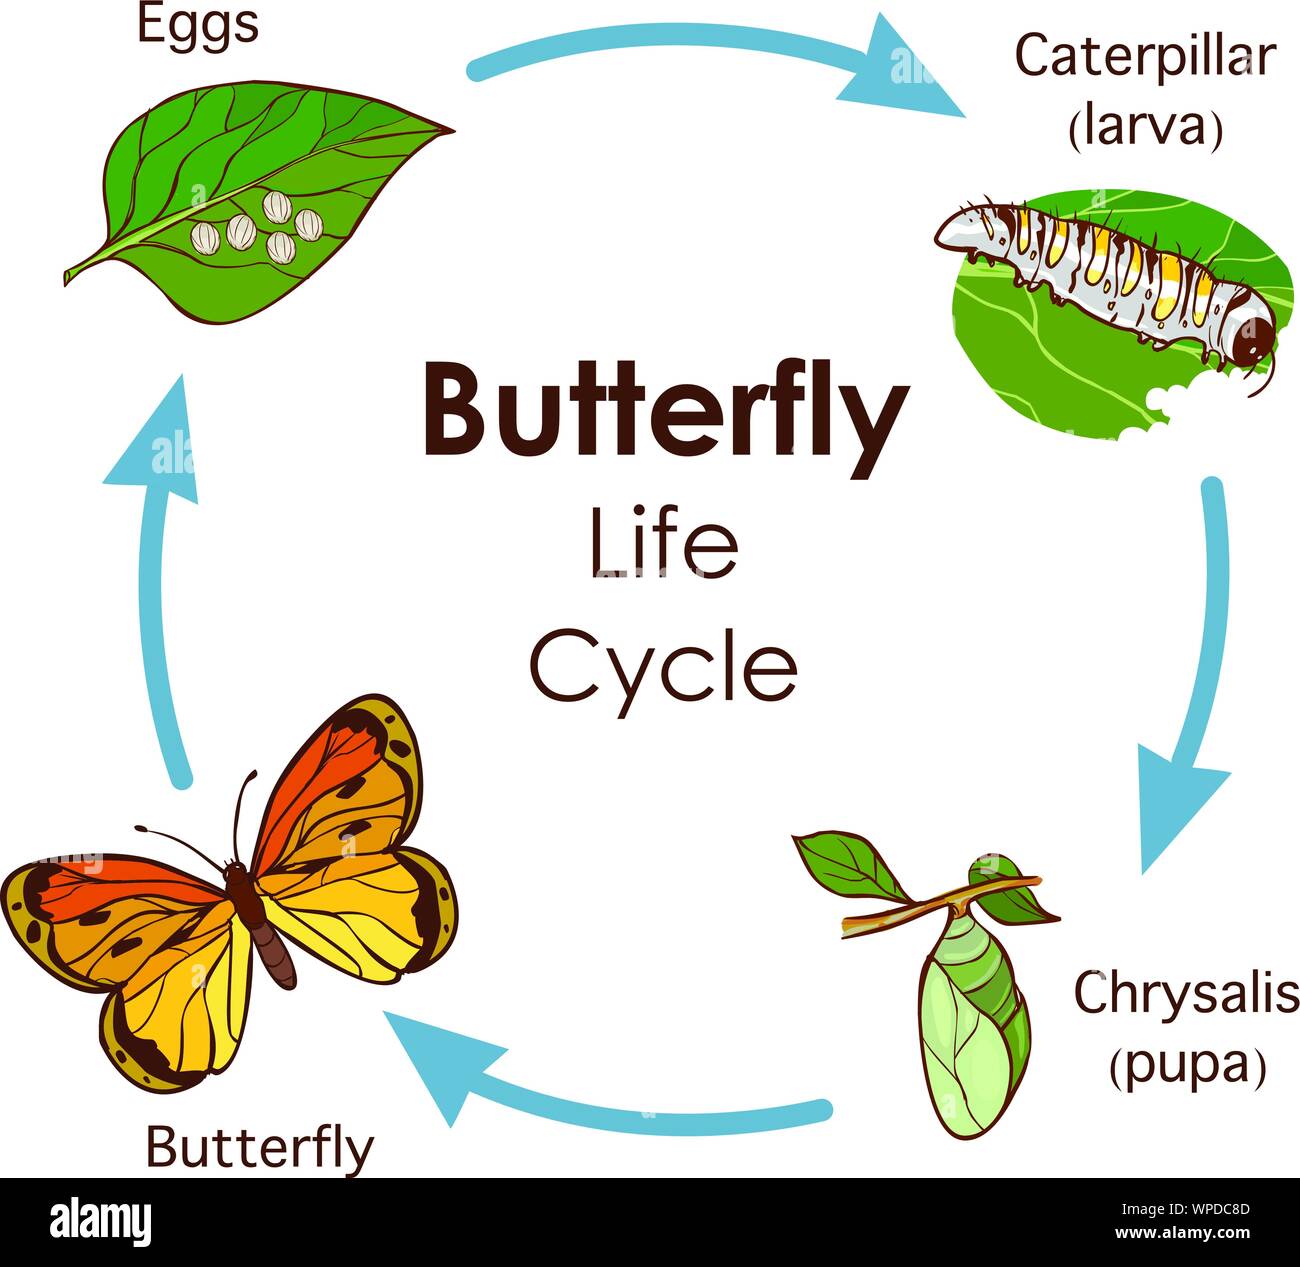 Life Cycle Of A Butterfly - Lessons - Blendspace Inside Butterfly Life Cycle Worksheet 2